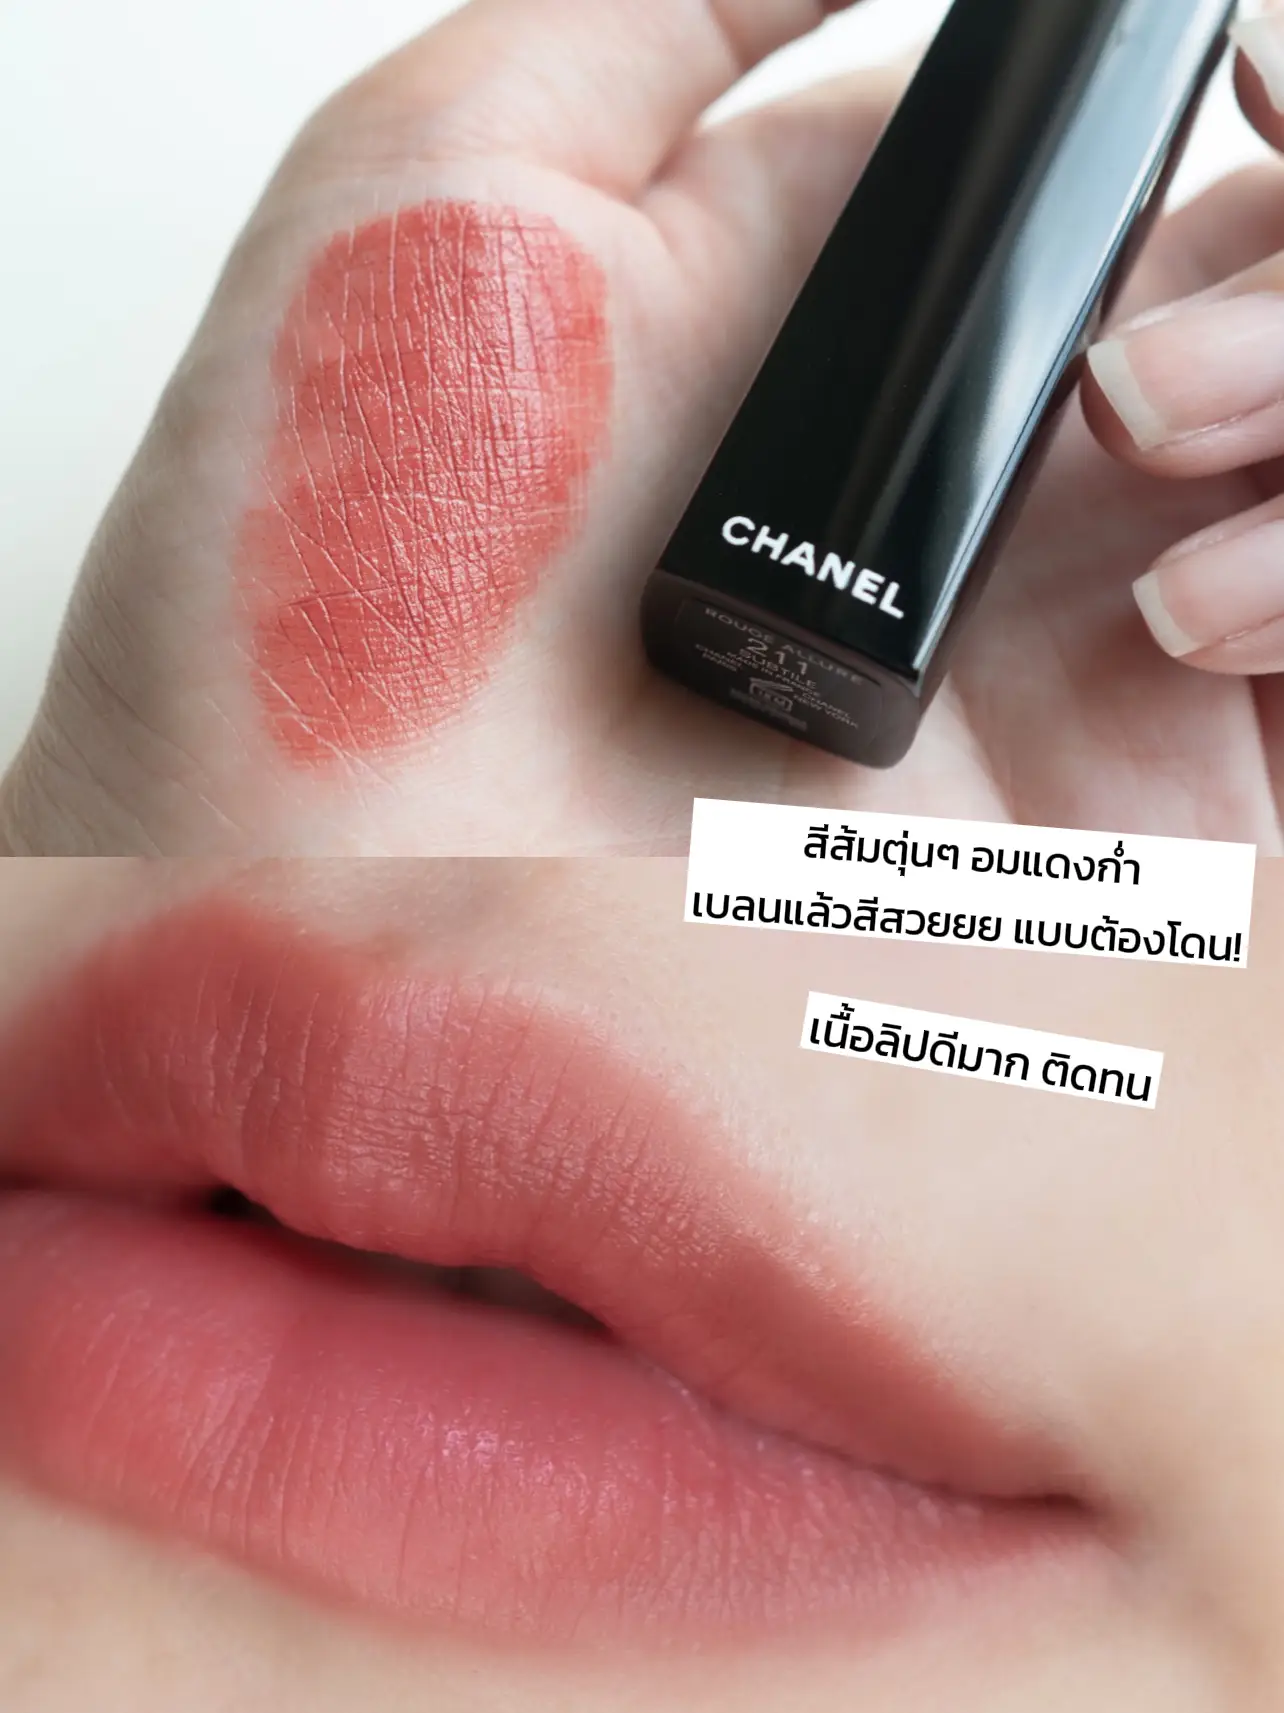 Nude lip tone drug label. The new call from Chanel 🍁 is very good., Gallery posted by JnJenny Blog